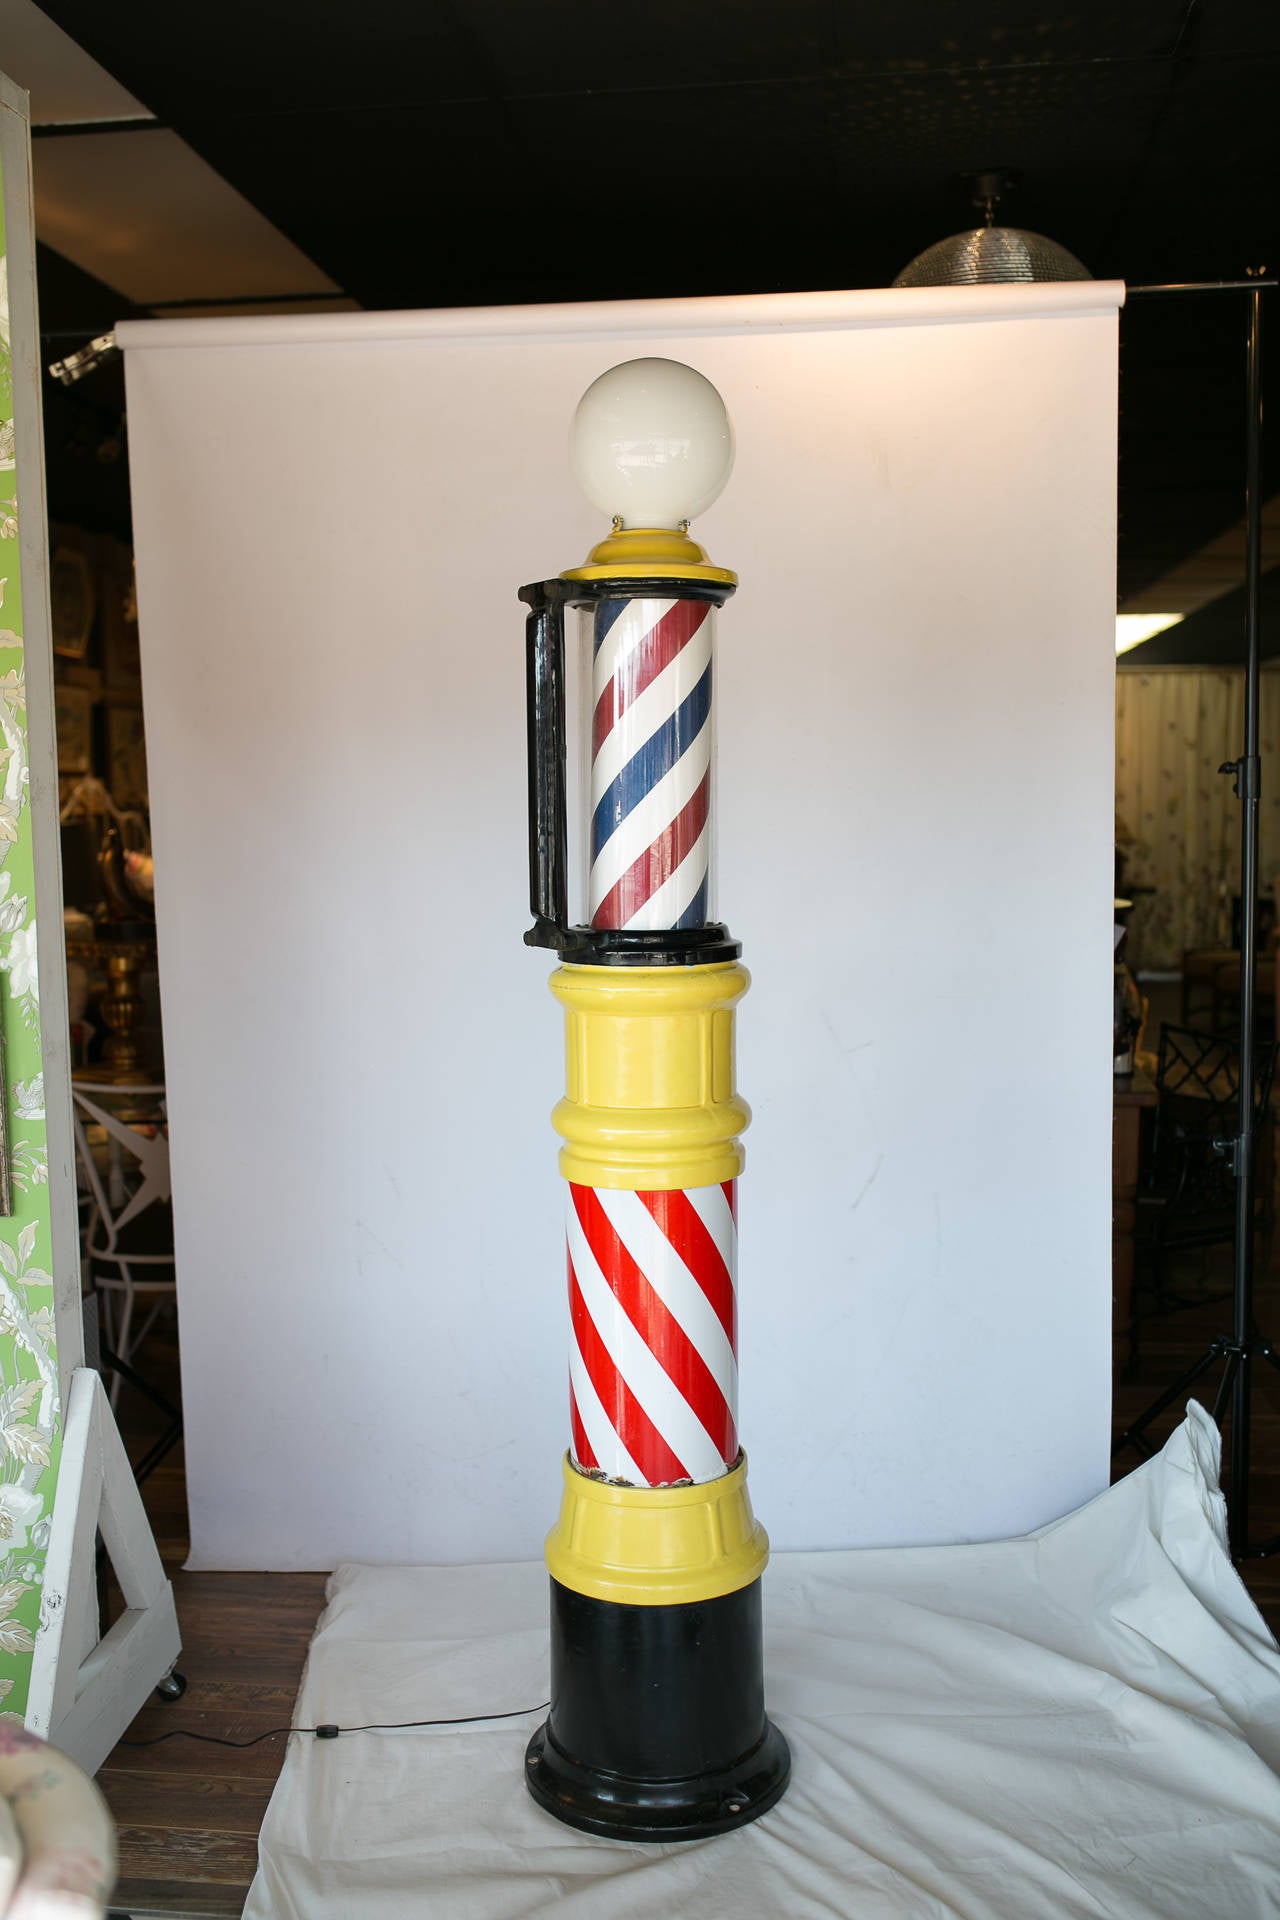 Dating from the 1920s, this brightly hued Theo A. Koch of Chicago brand barber pole has been newly wired and the globe and spinning stripes refurbished. The perfect conversation piece for a basement bar or for that special gent’s study.